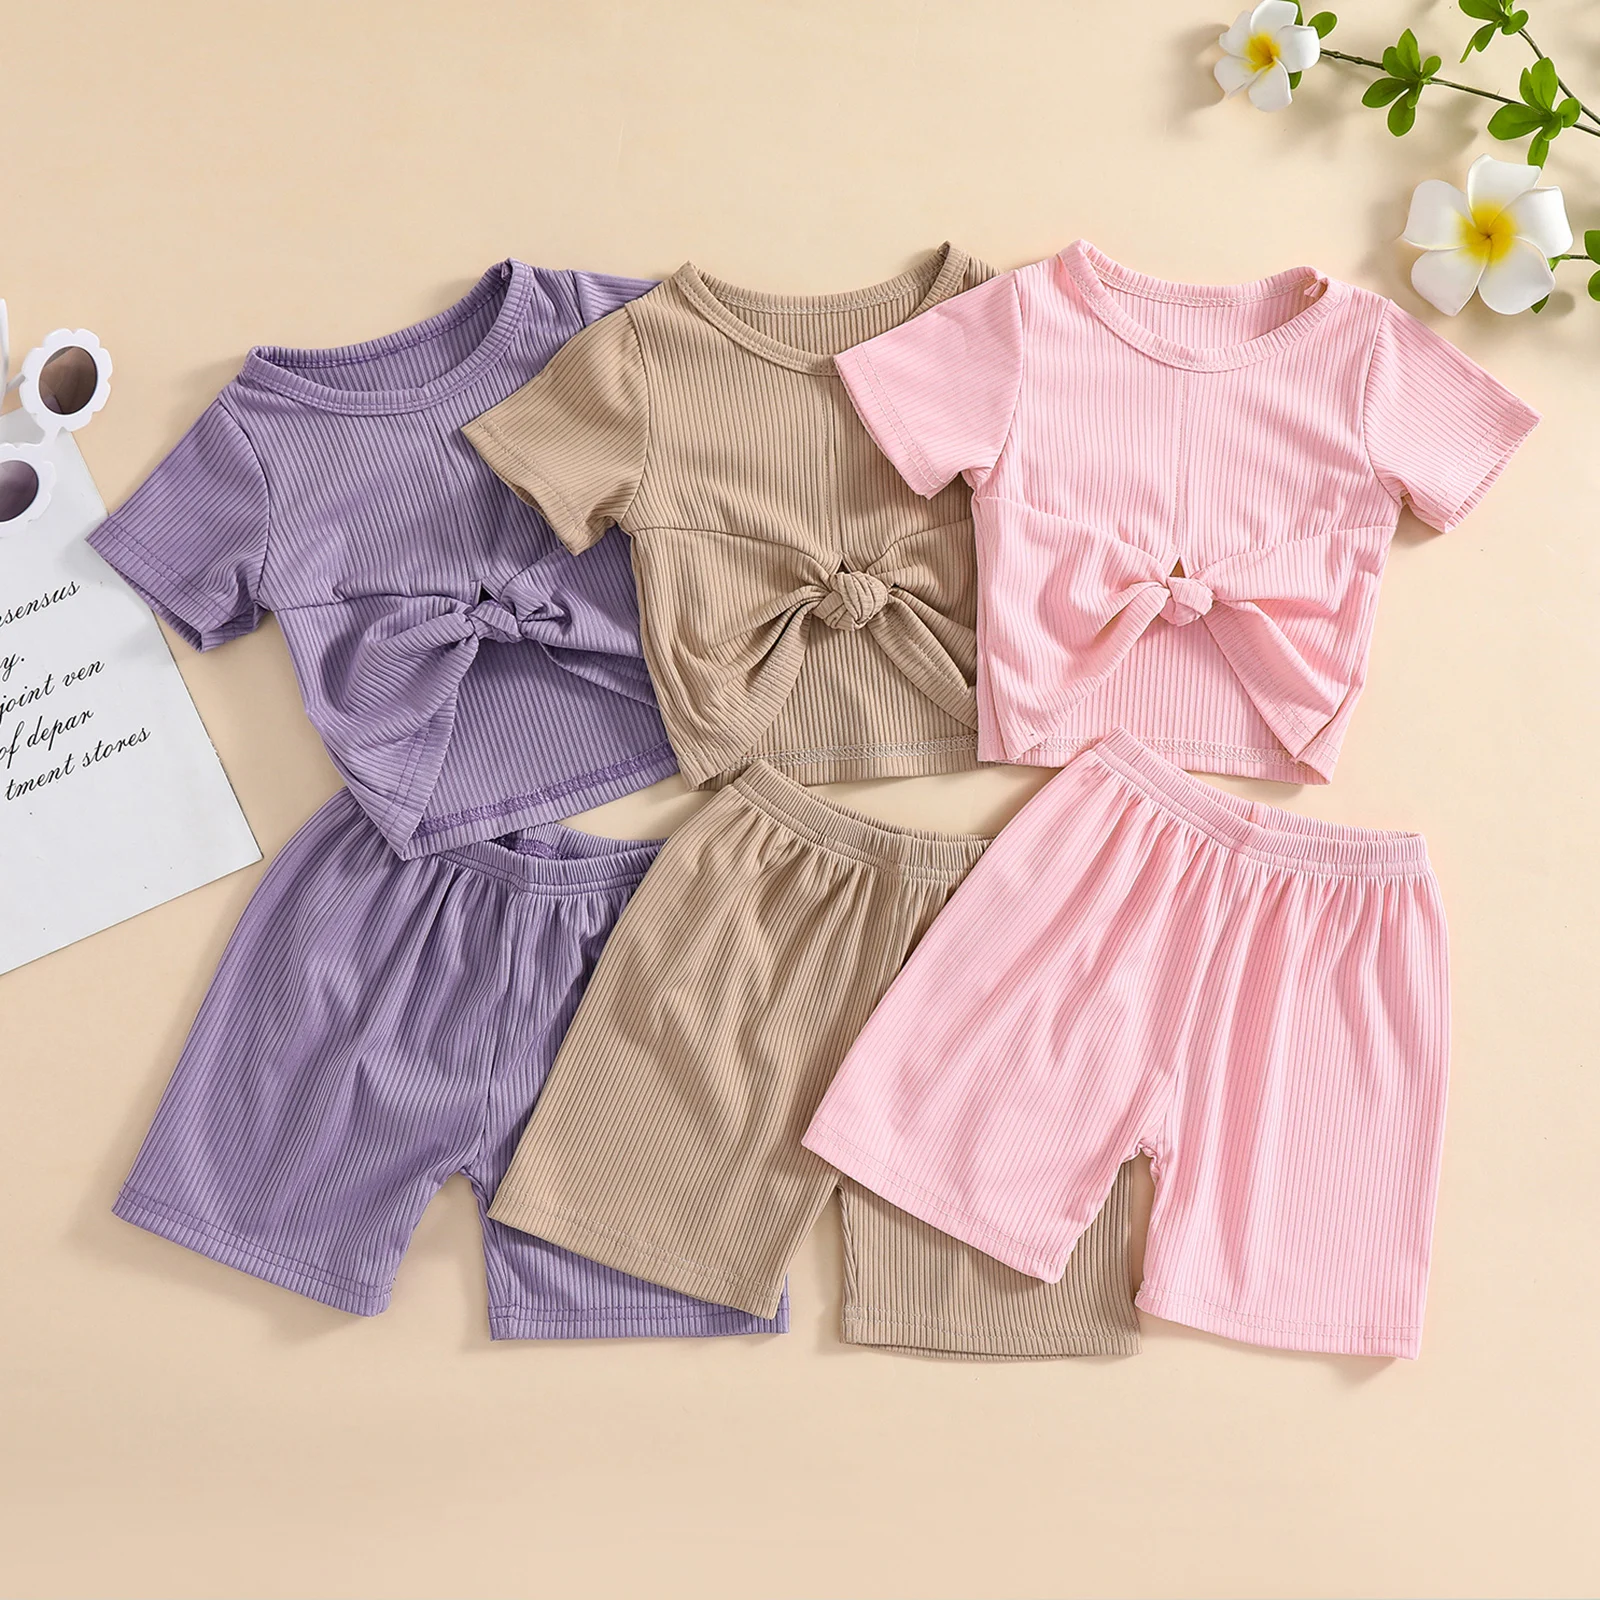 Short Sleeve Collect Waist T Shirts 3 Colors Toddler Summer Baby Girls Clothes Sets Outfits 1-5Y Solid Conjunto Infantil Menina enlarge